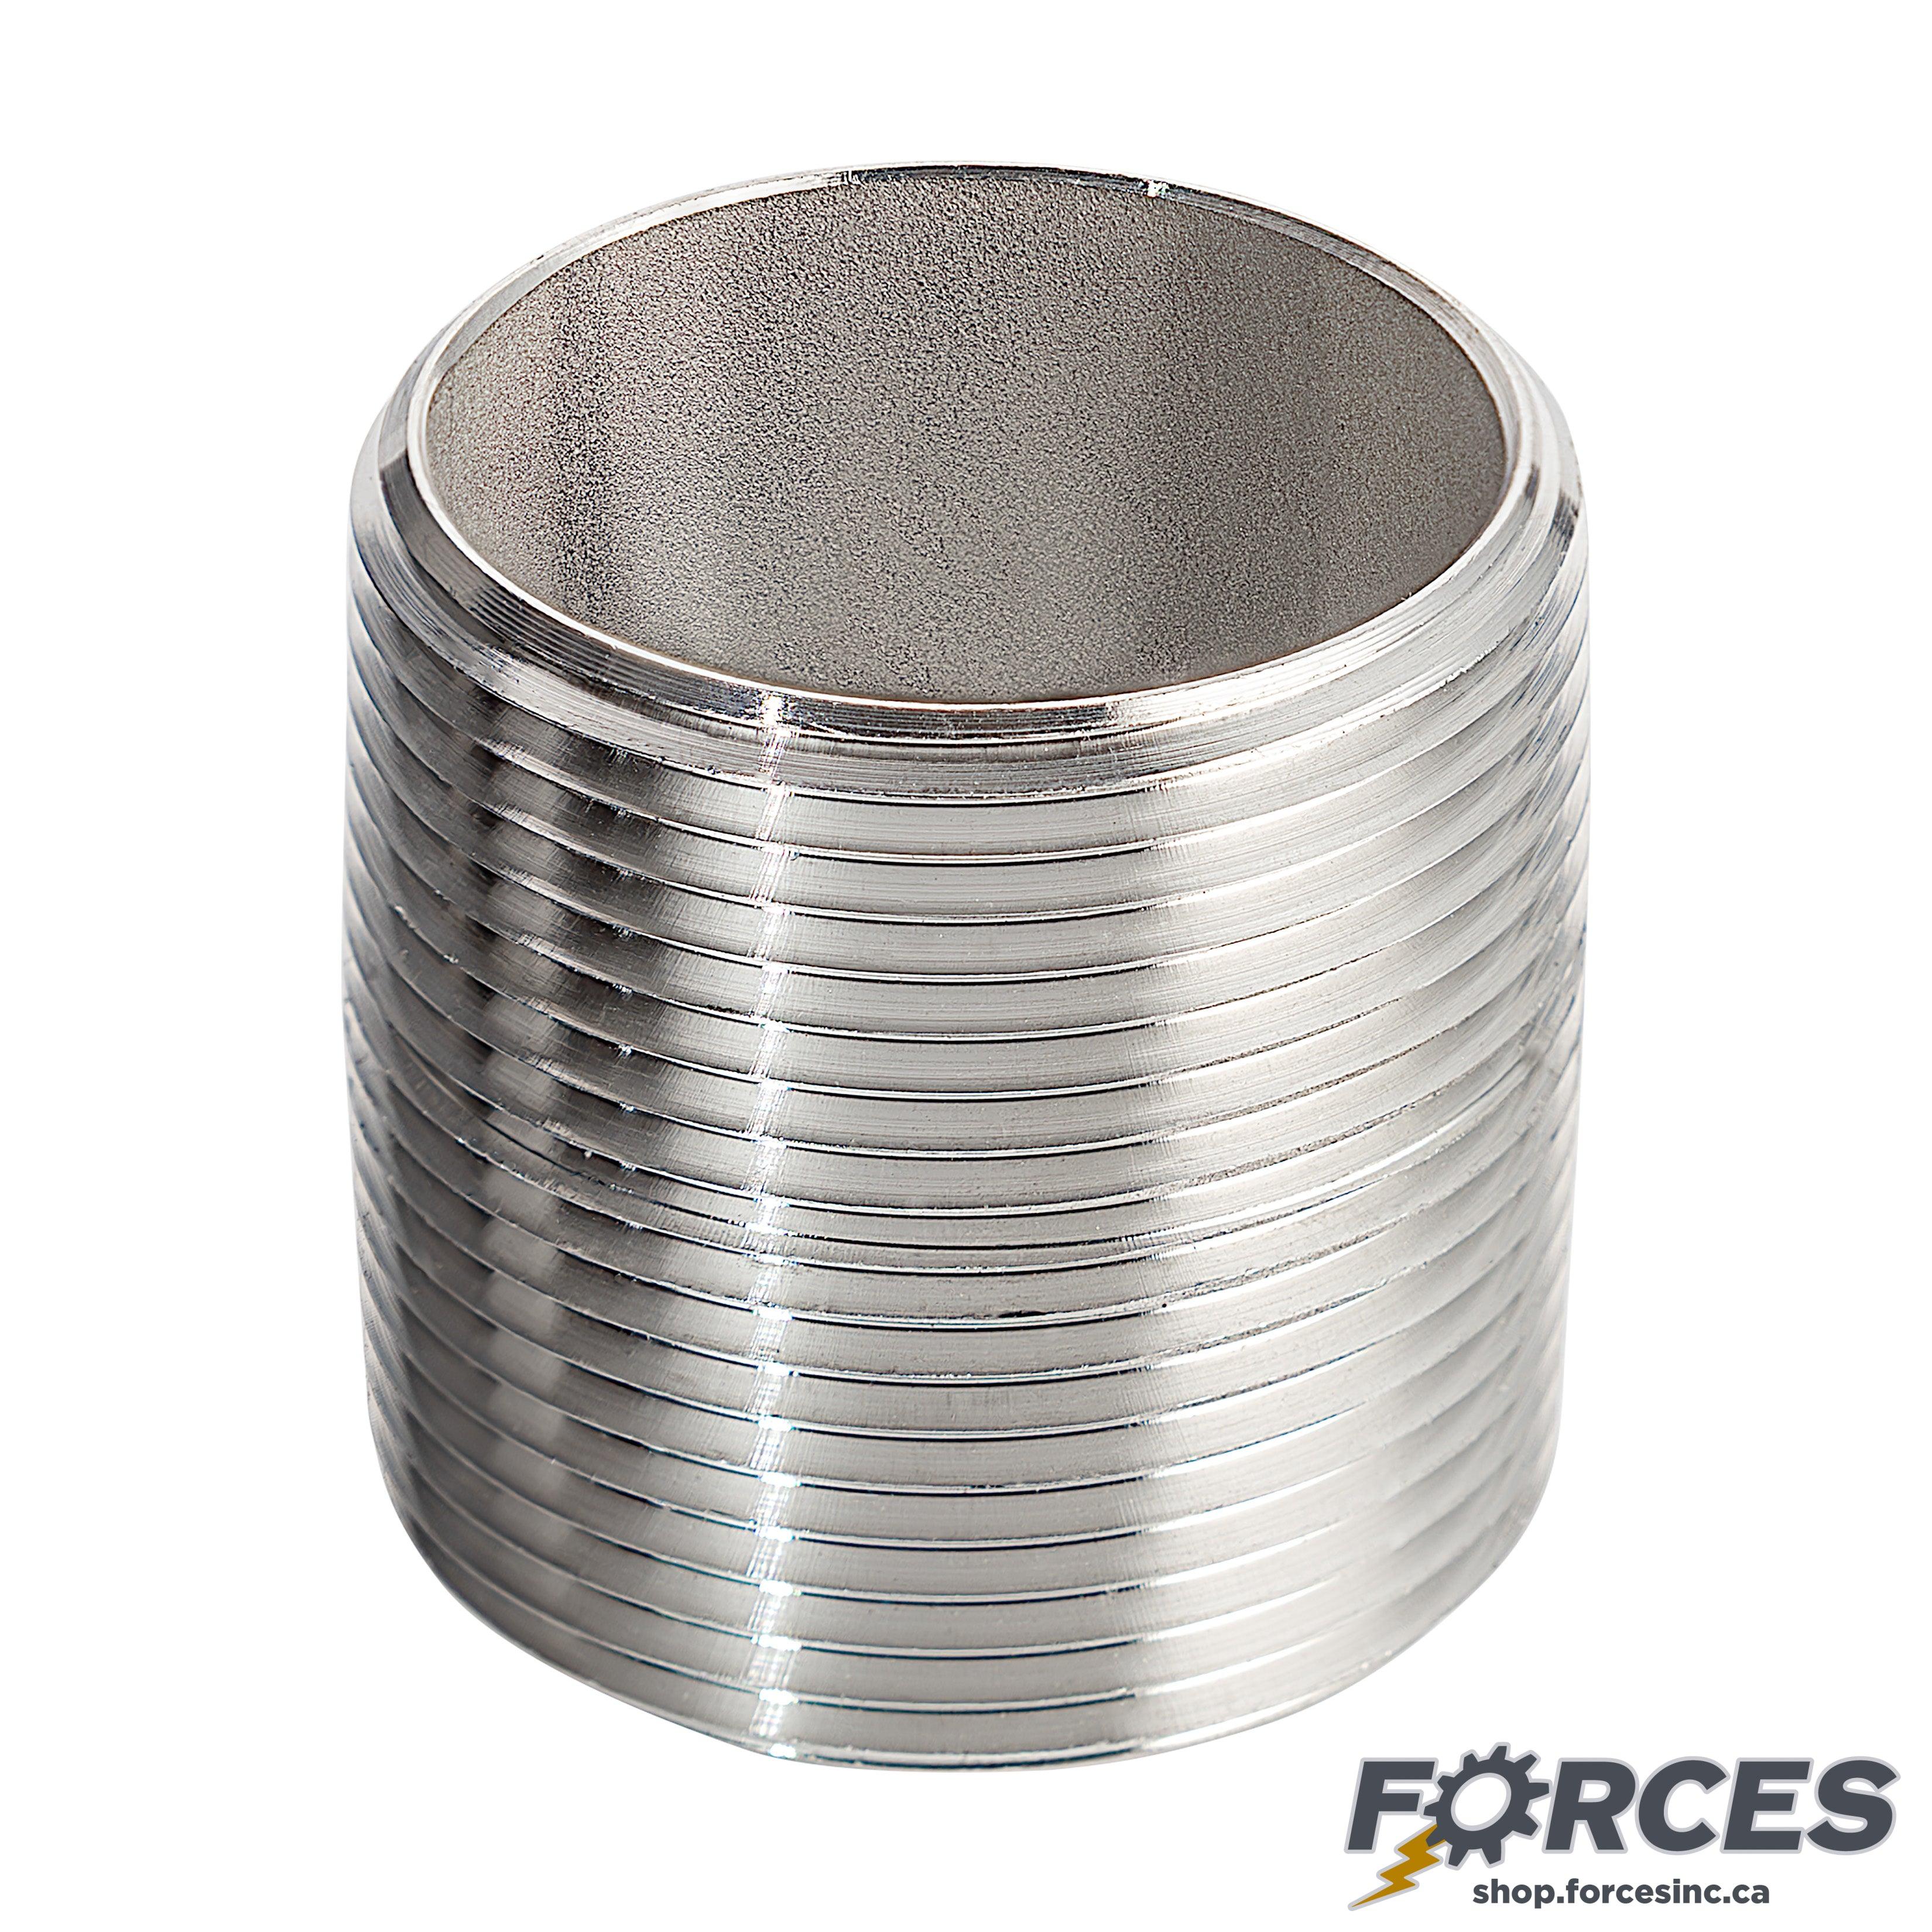 1/2" Closed Nipple - Stainless Steel 316 - Forces Inc